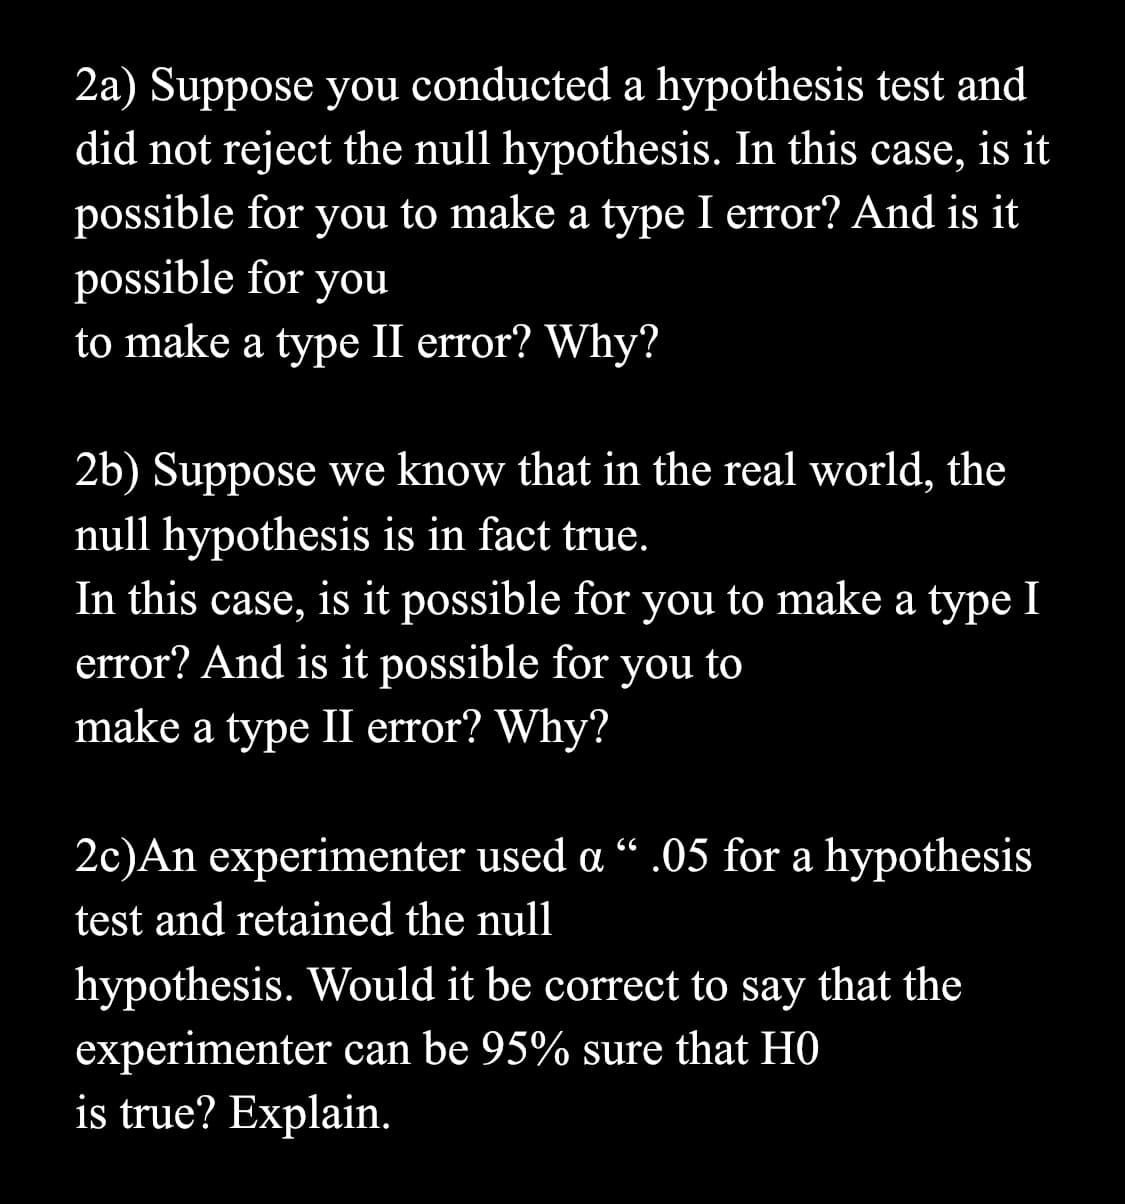 2a) Suppose you conducted a hypothesis test and
did not reject the null hypothesis. In this case, is it
possible for you to make a type I error? And is it
possible for you
to make a type II error? Why?
2b) Suppose we know that in the real world, the
null hypothesis is in fact true.
In this case, is it possible for you to make a type I
error? And is it possible for you to
make a type II error? Why?
2c)An experimenter used a " .05 for a hypothesis
test and retained the null
hypothesis. Would it be correct to say that the
experimenter can be 95% sure that HO
is true? Explain.